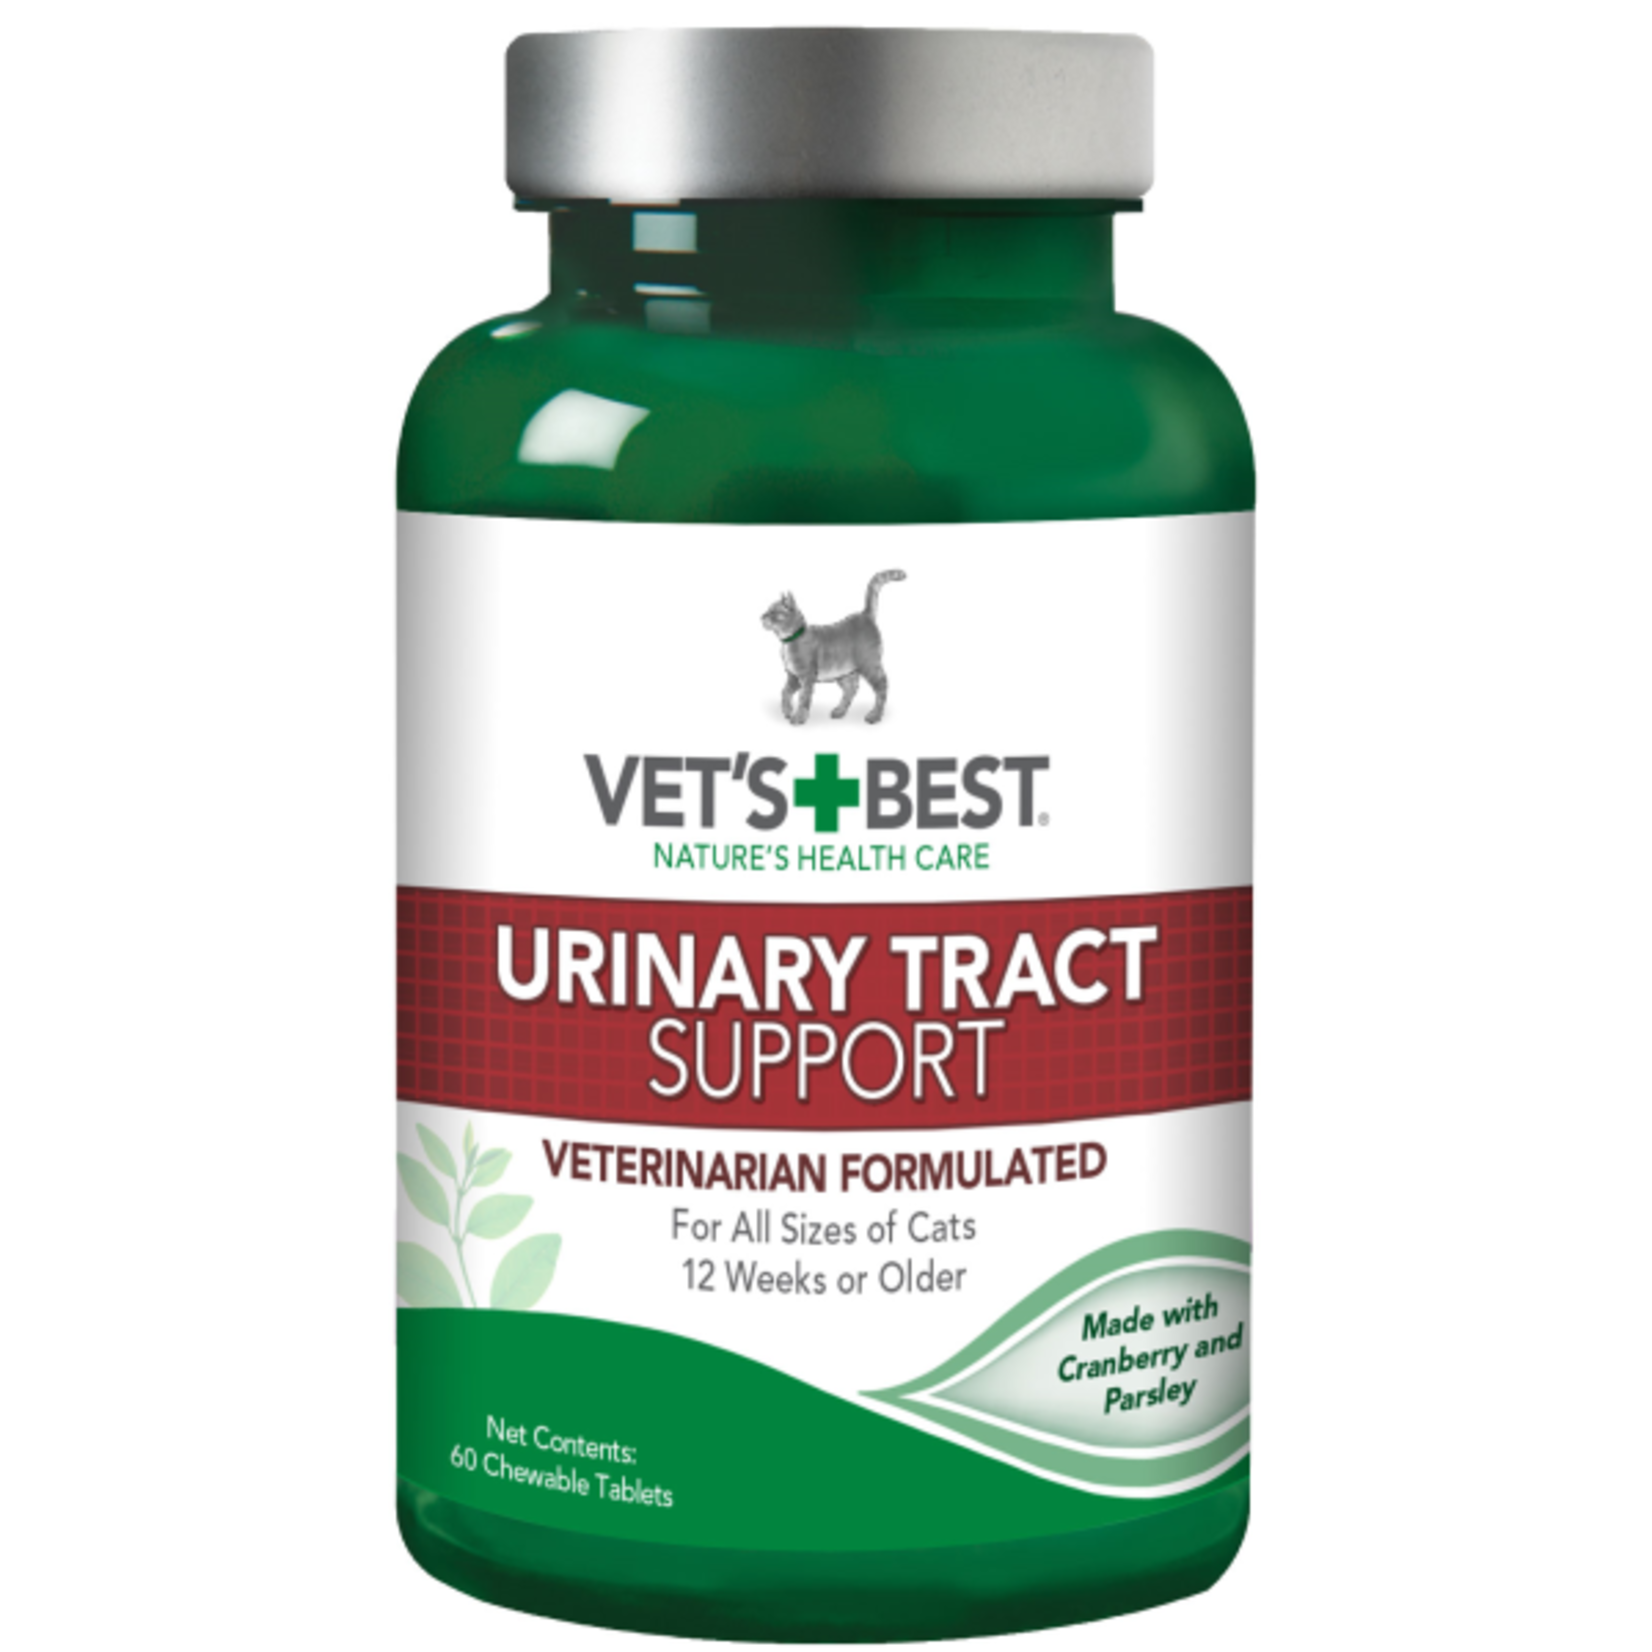 Vets Best Vet's Best Cat Urinary Tract Support 60 Tab